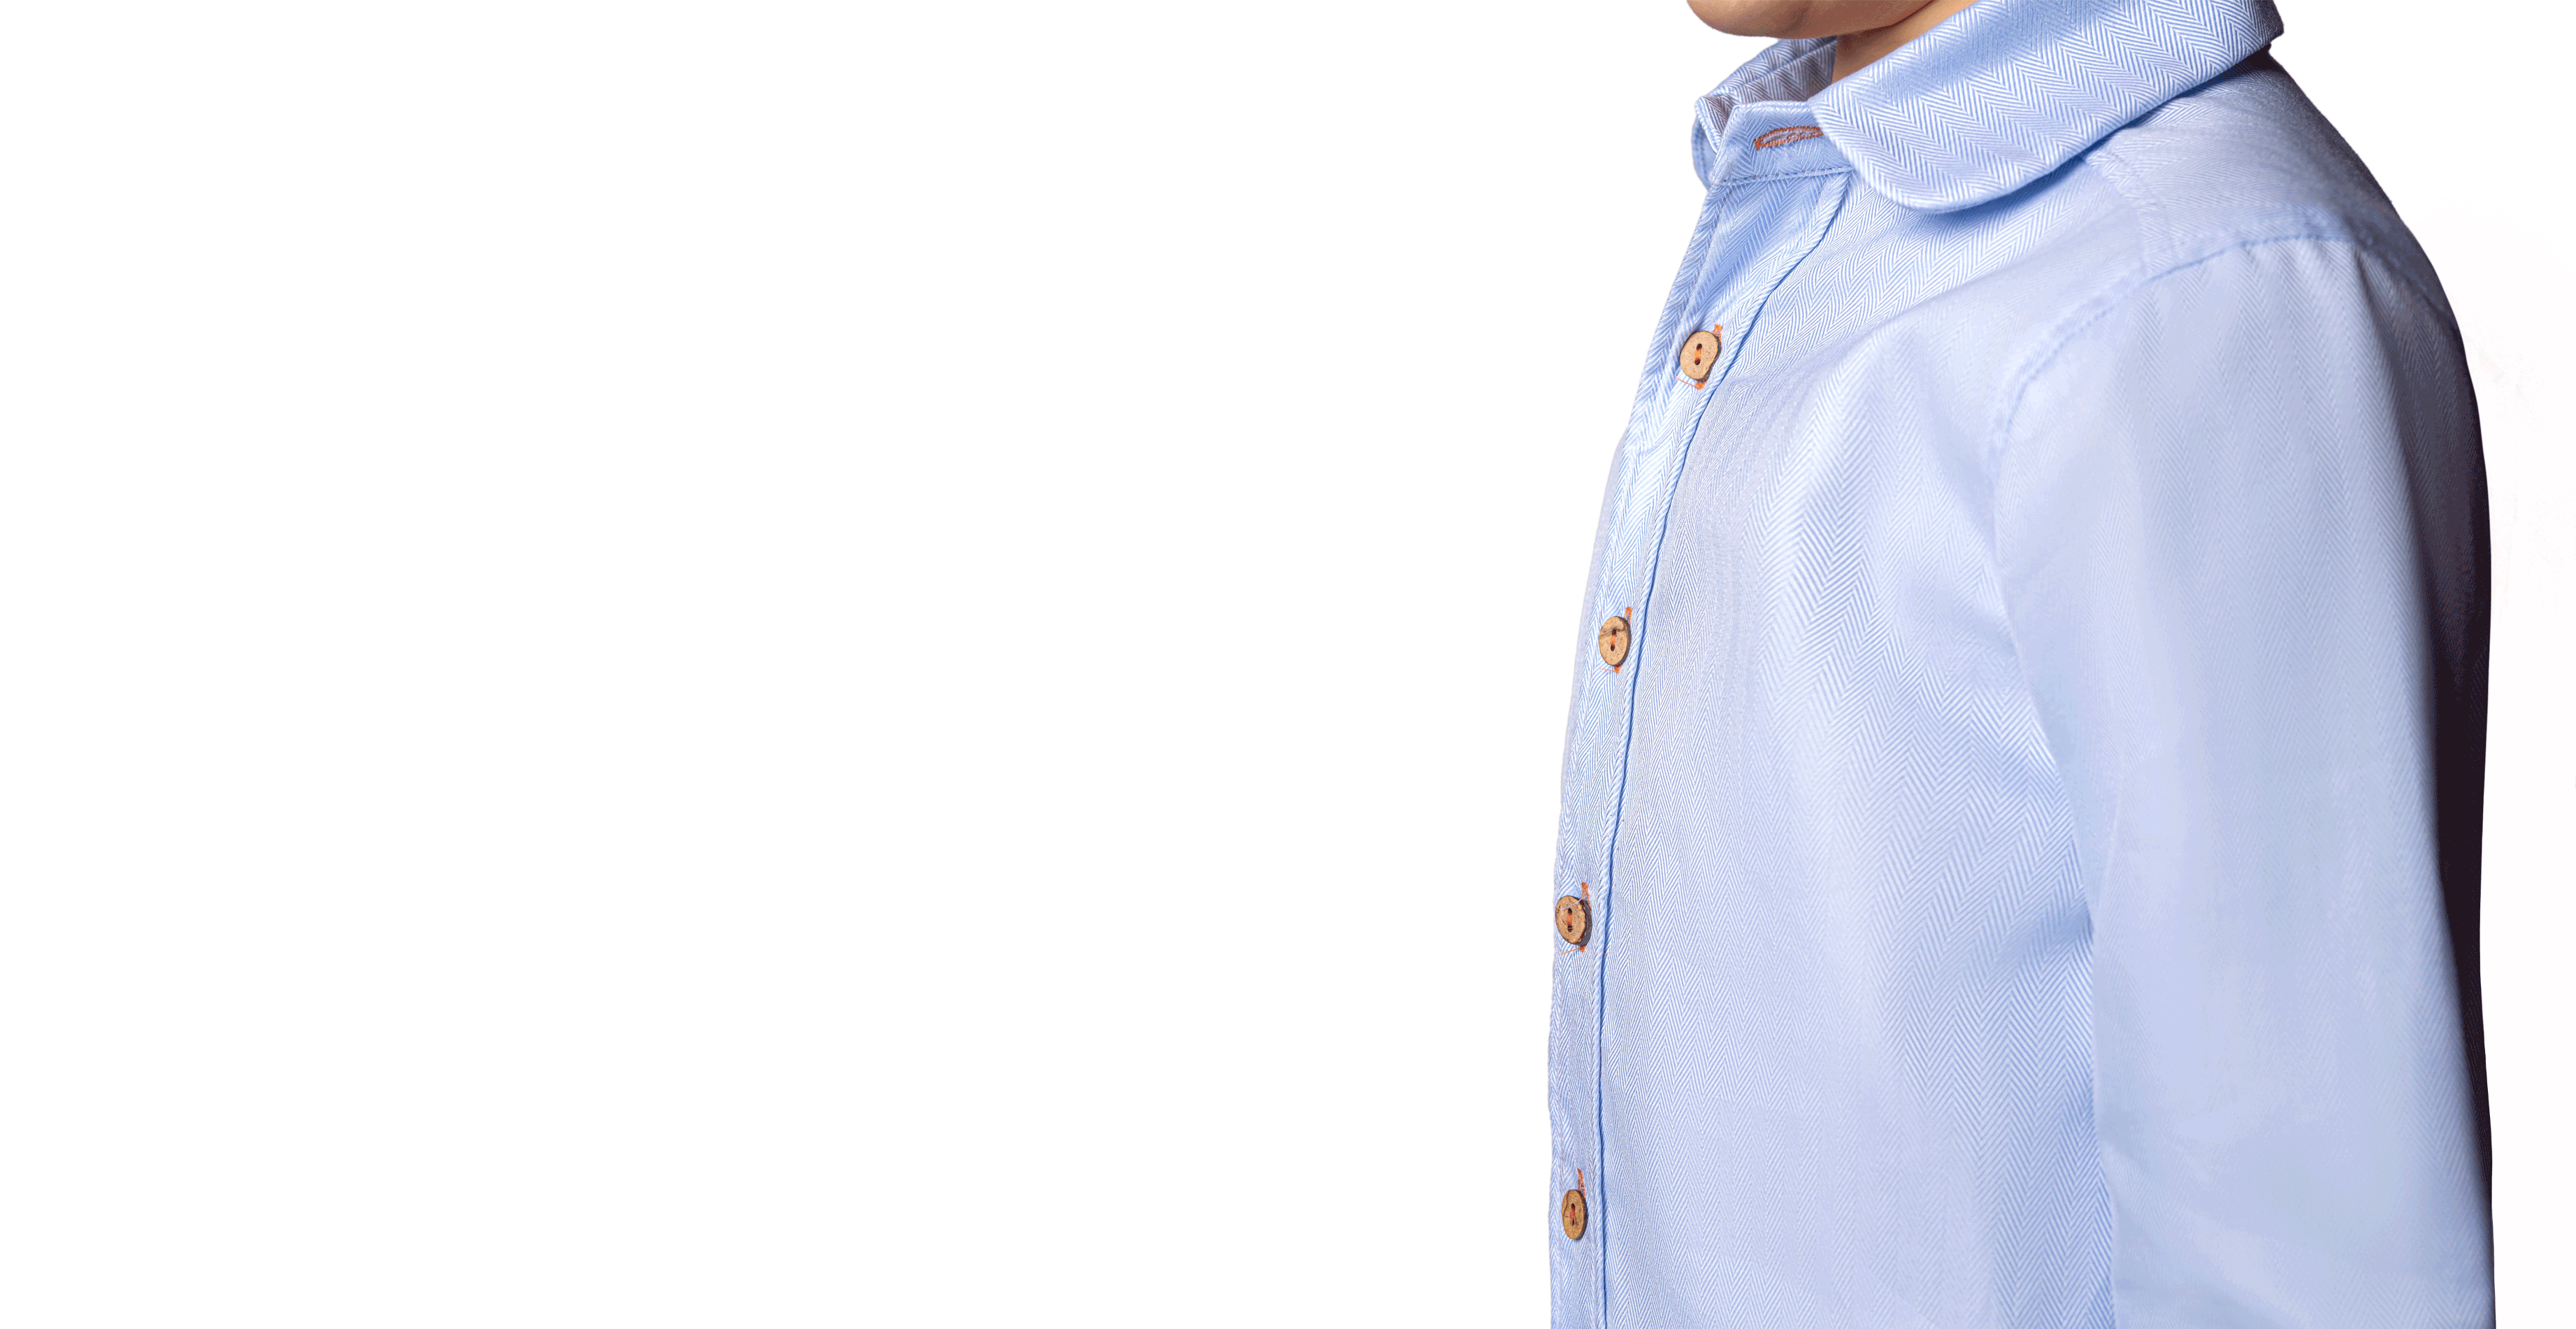 kidish anti spill and liquid repellent buttoned down dress shirt product photo 